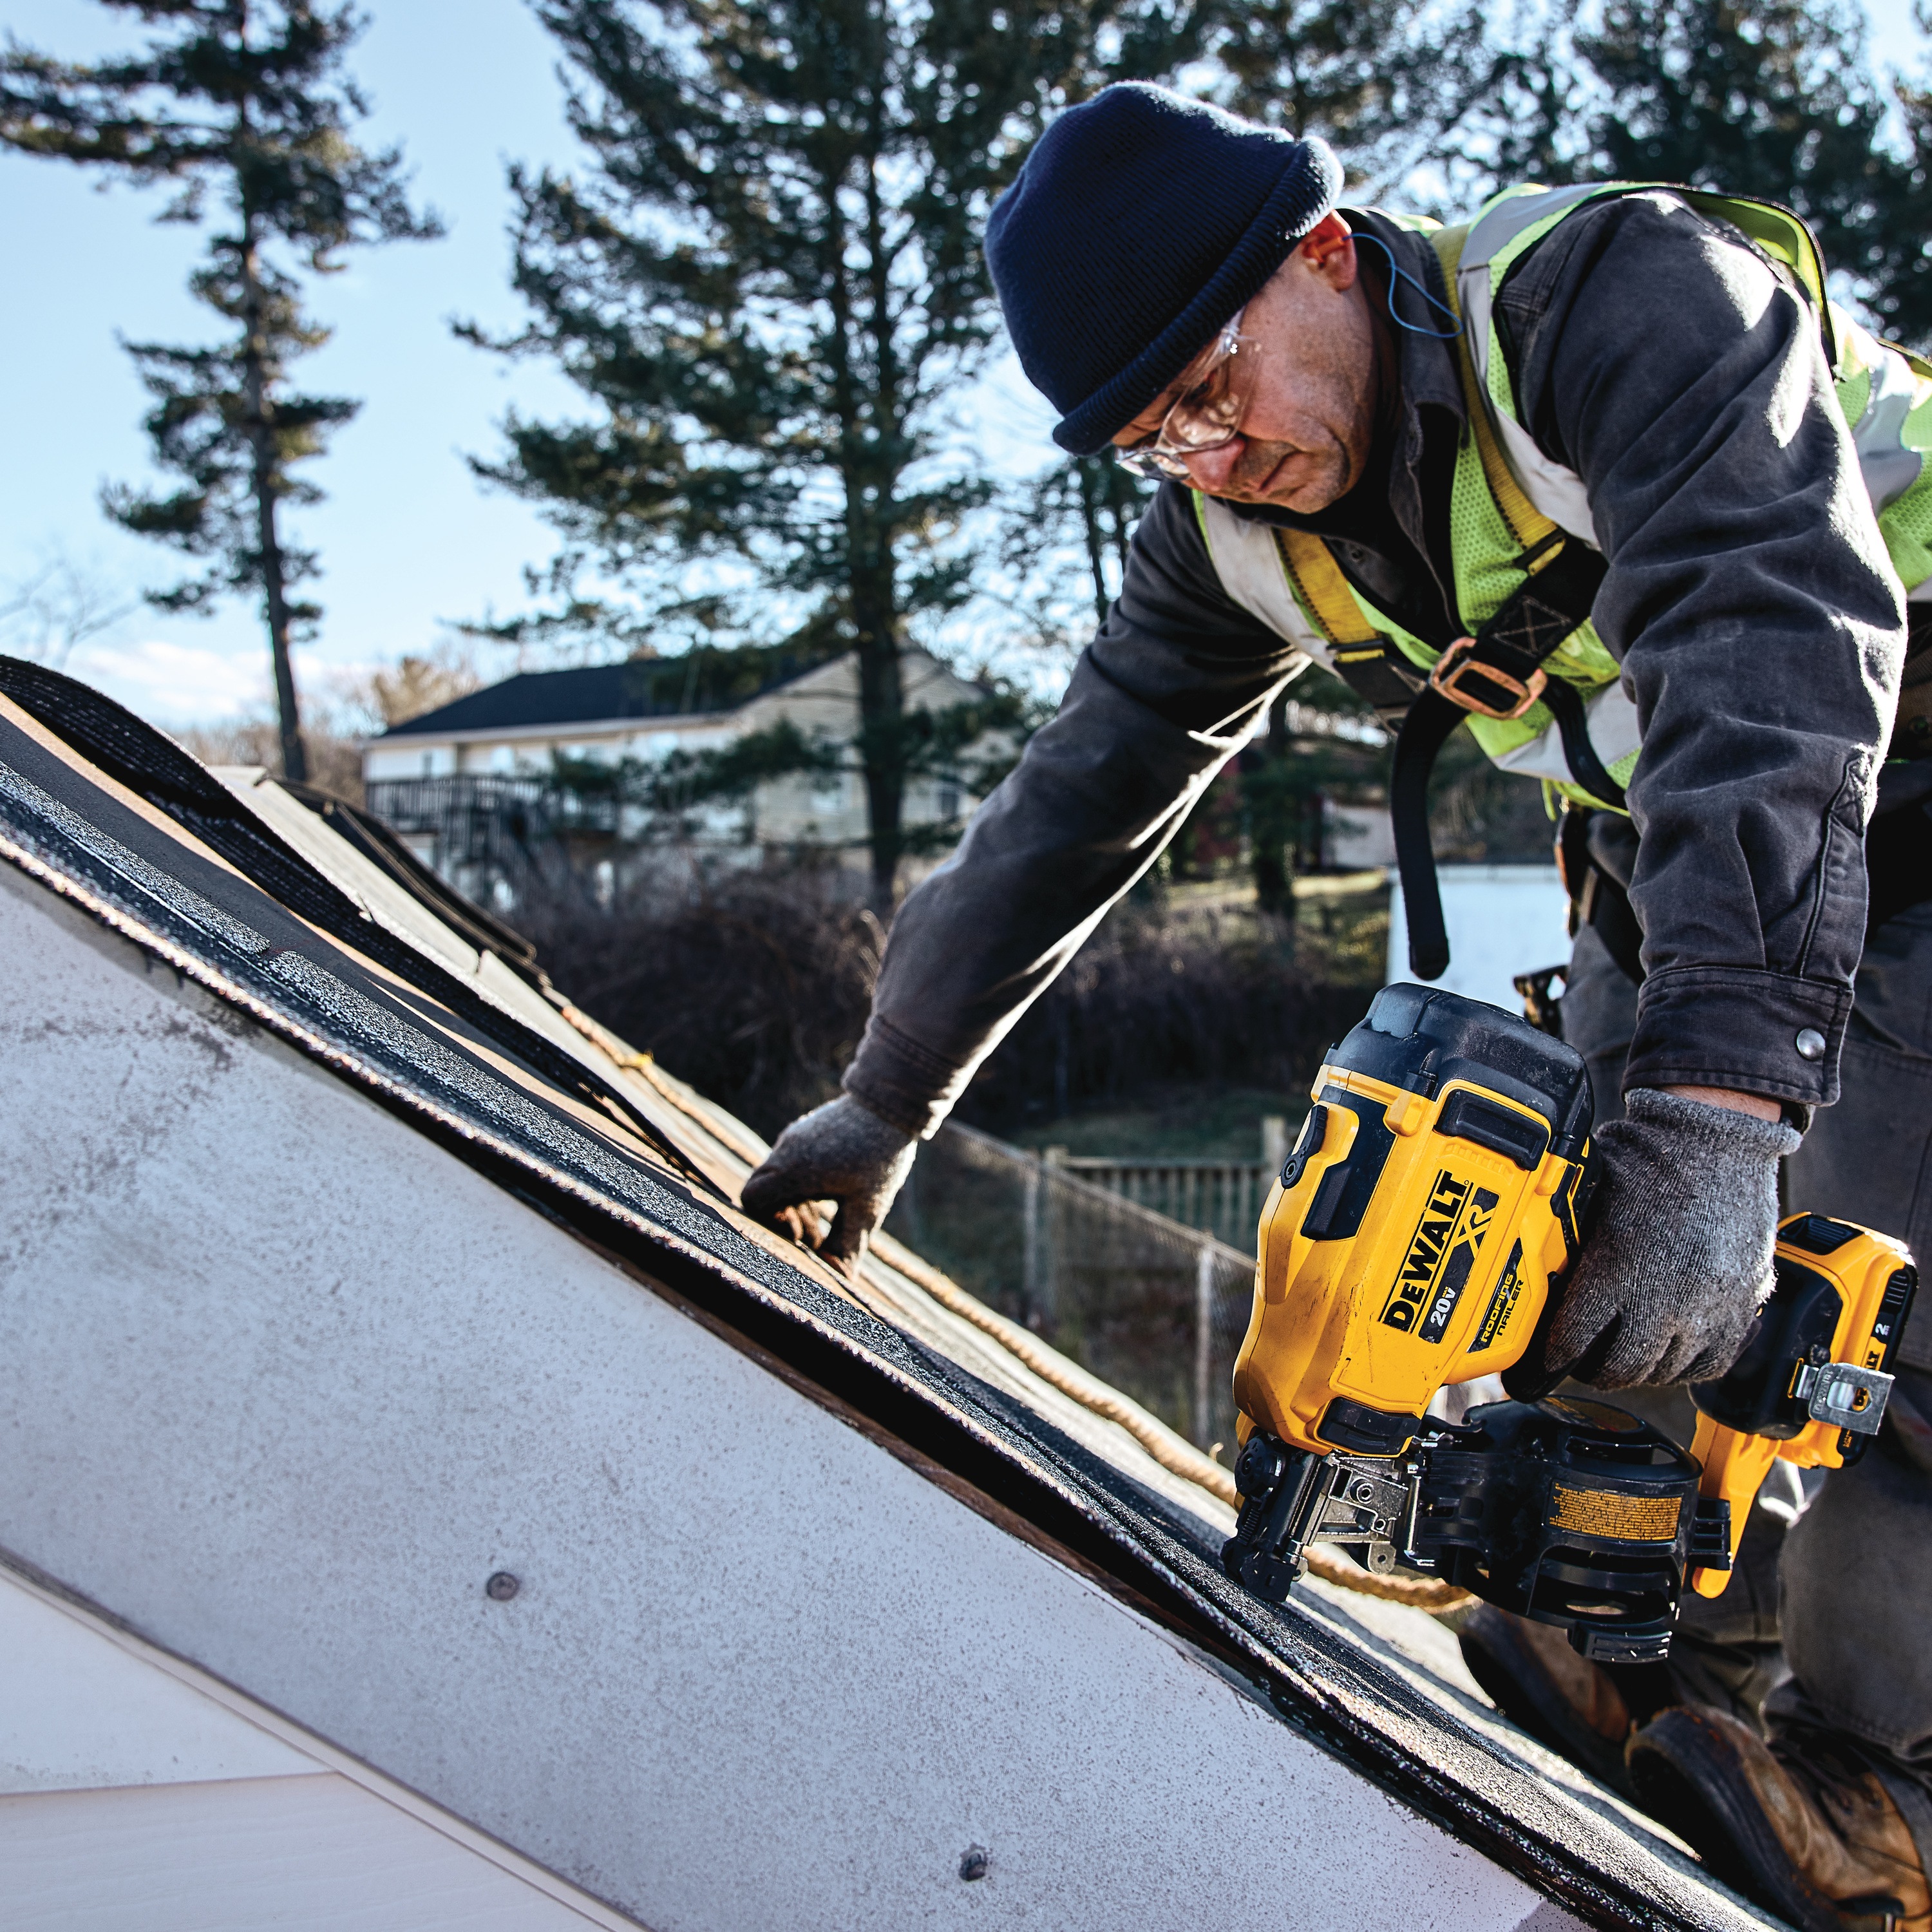 Cordless Coil Roofing Nailer being used by a construction worker on a roof